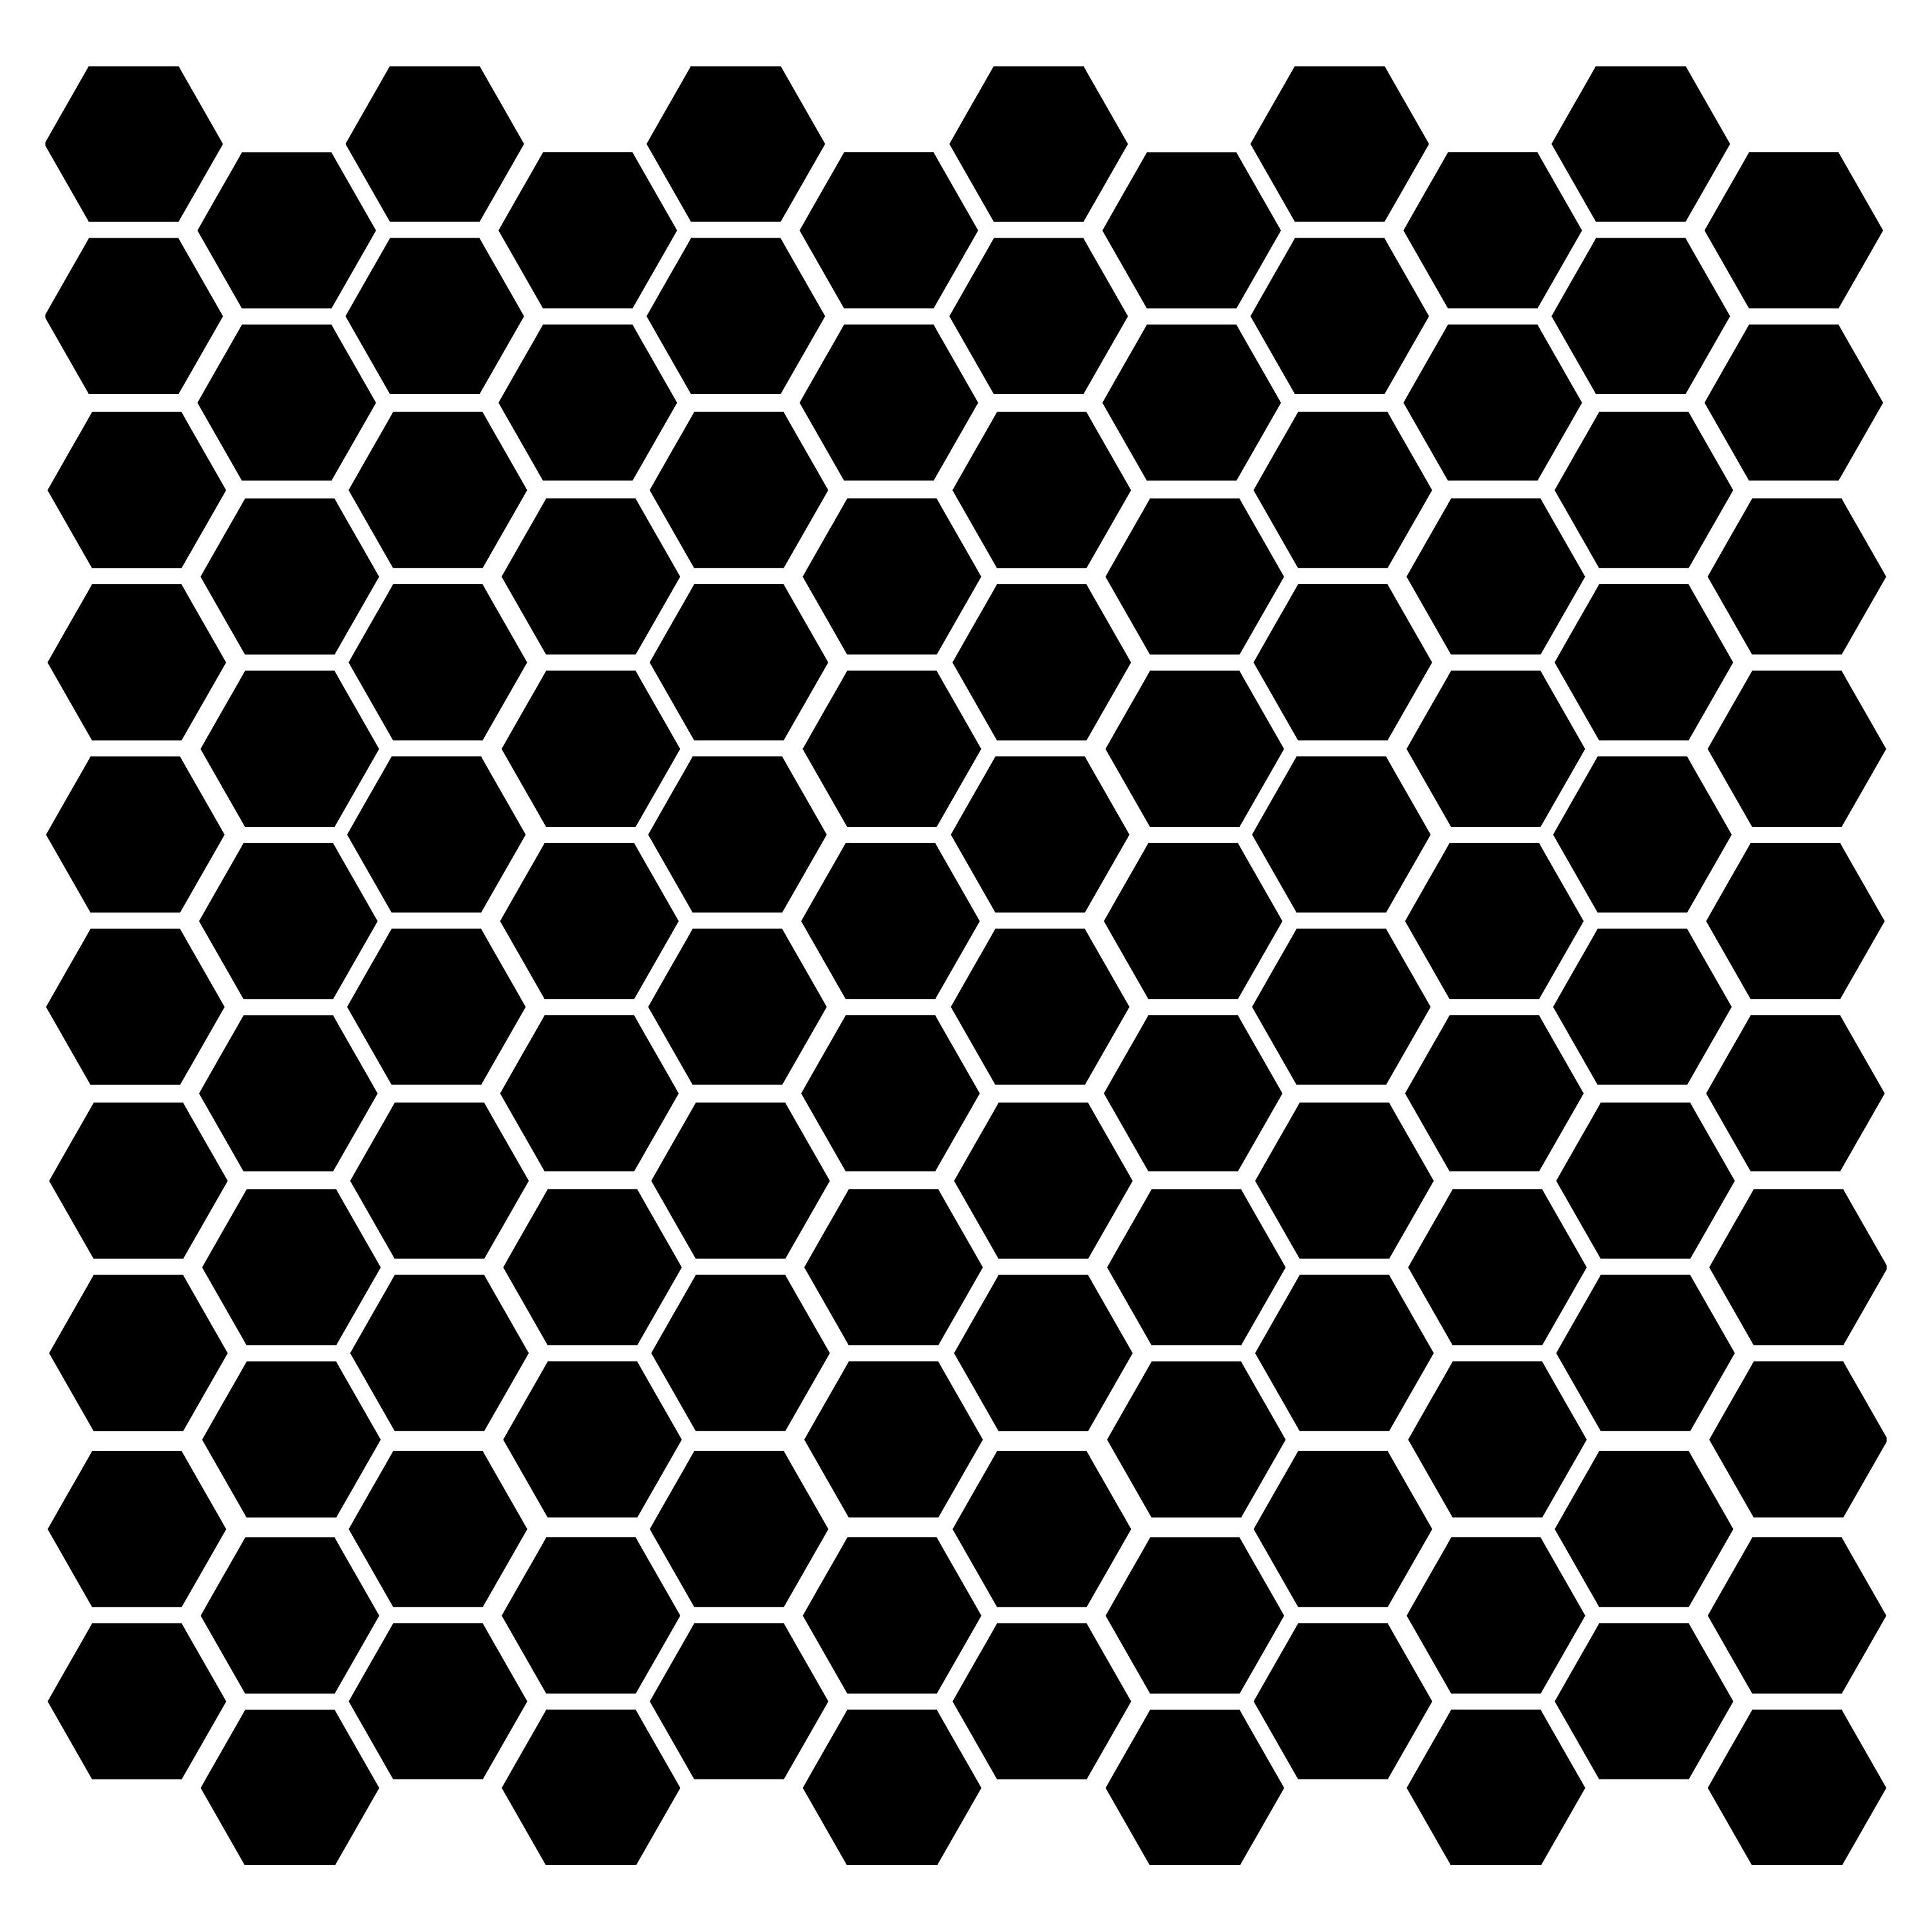 1/2 HONEYCOMB BEEHIVE STENCIL, Hexagon Pattern, Shapes Template 